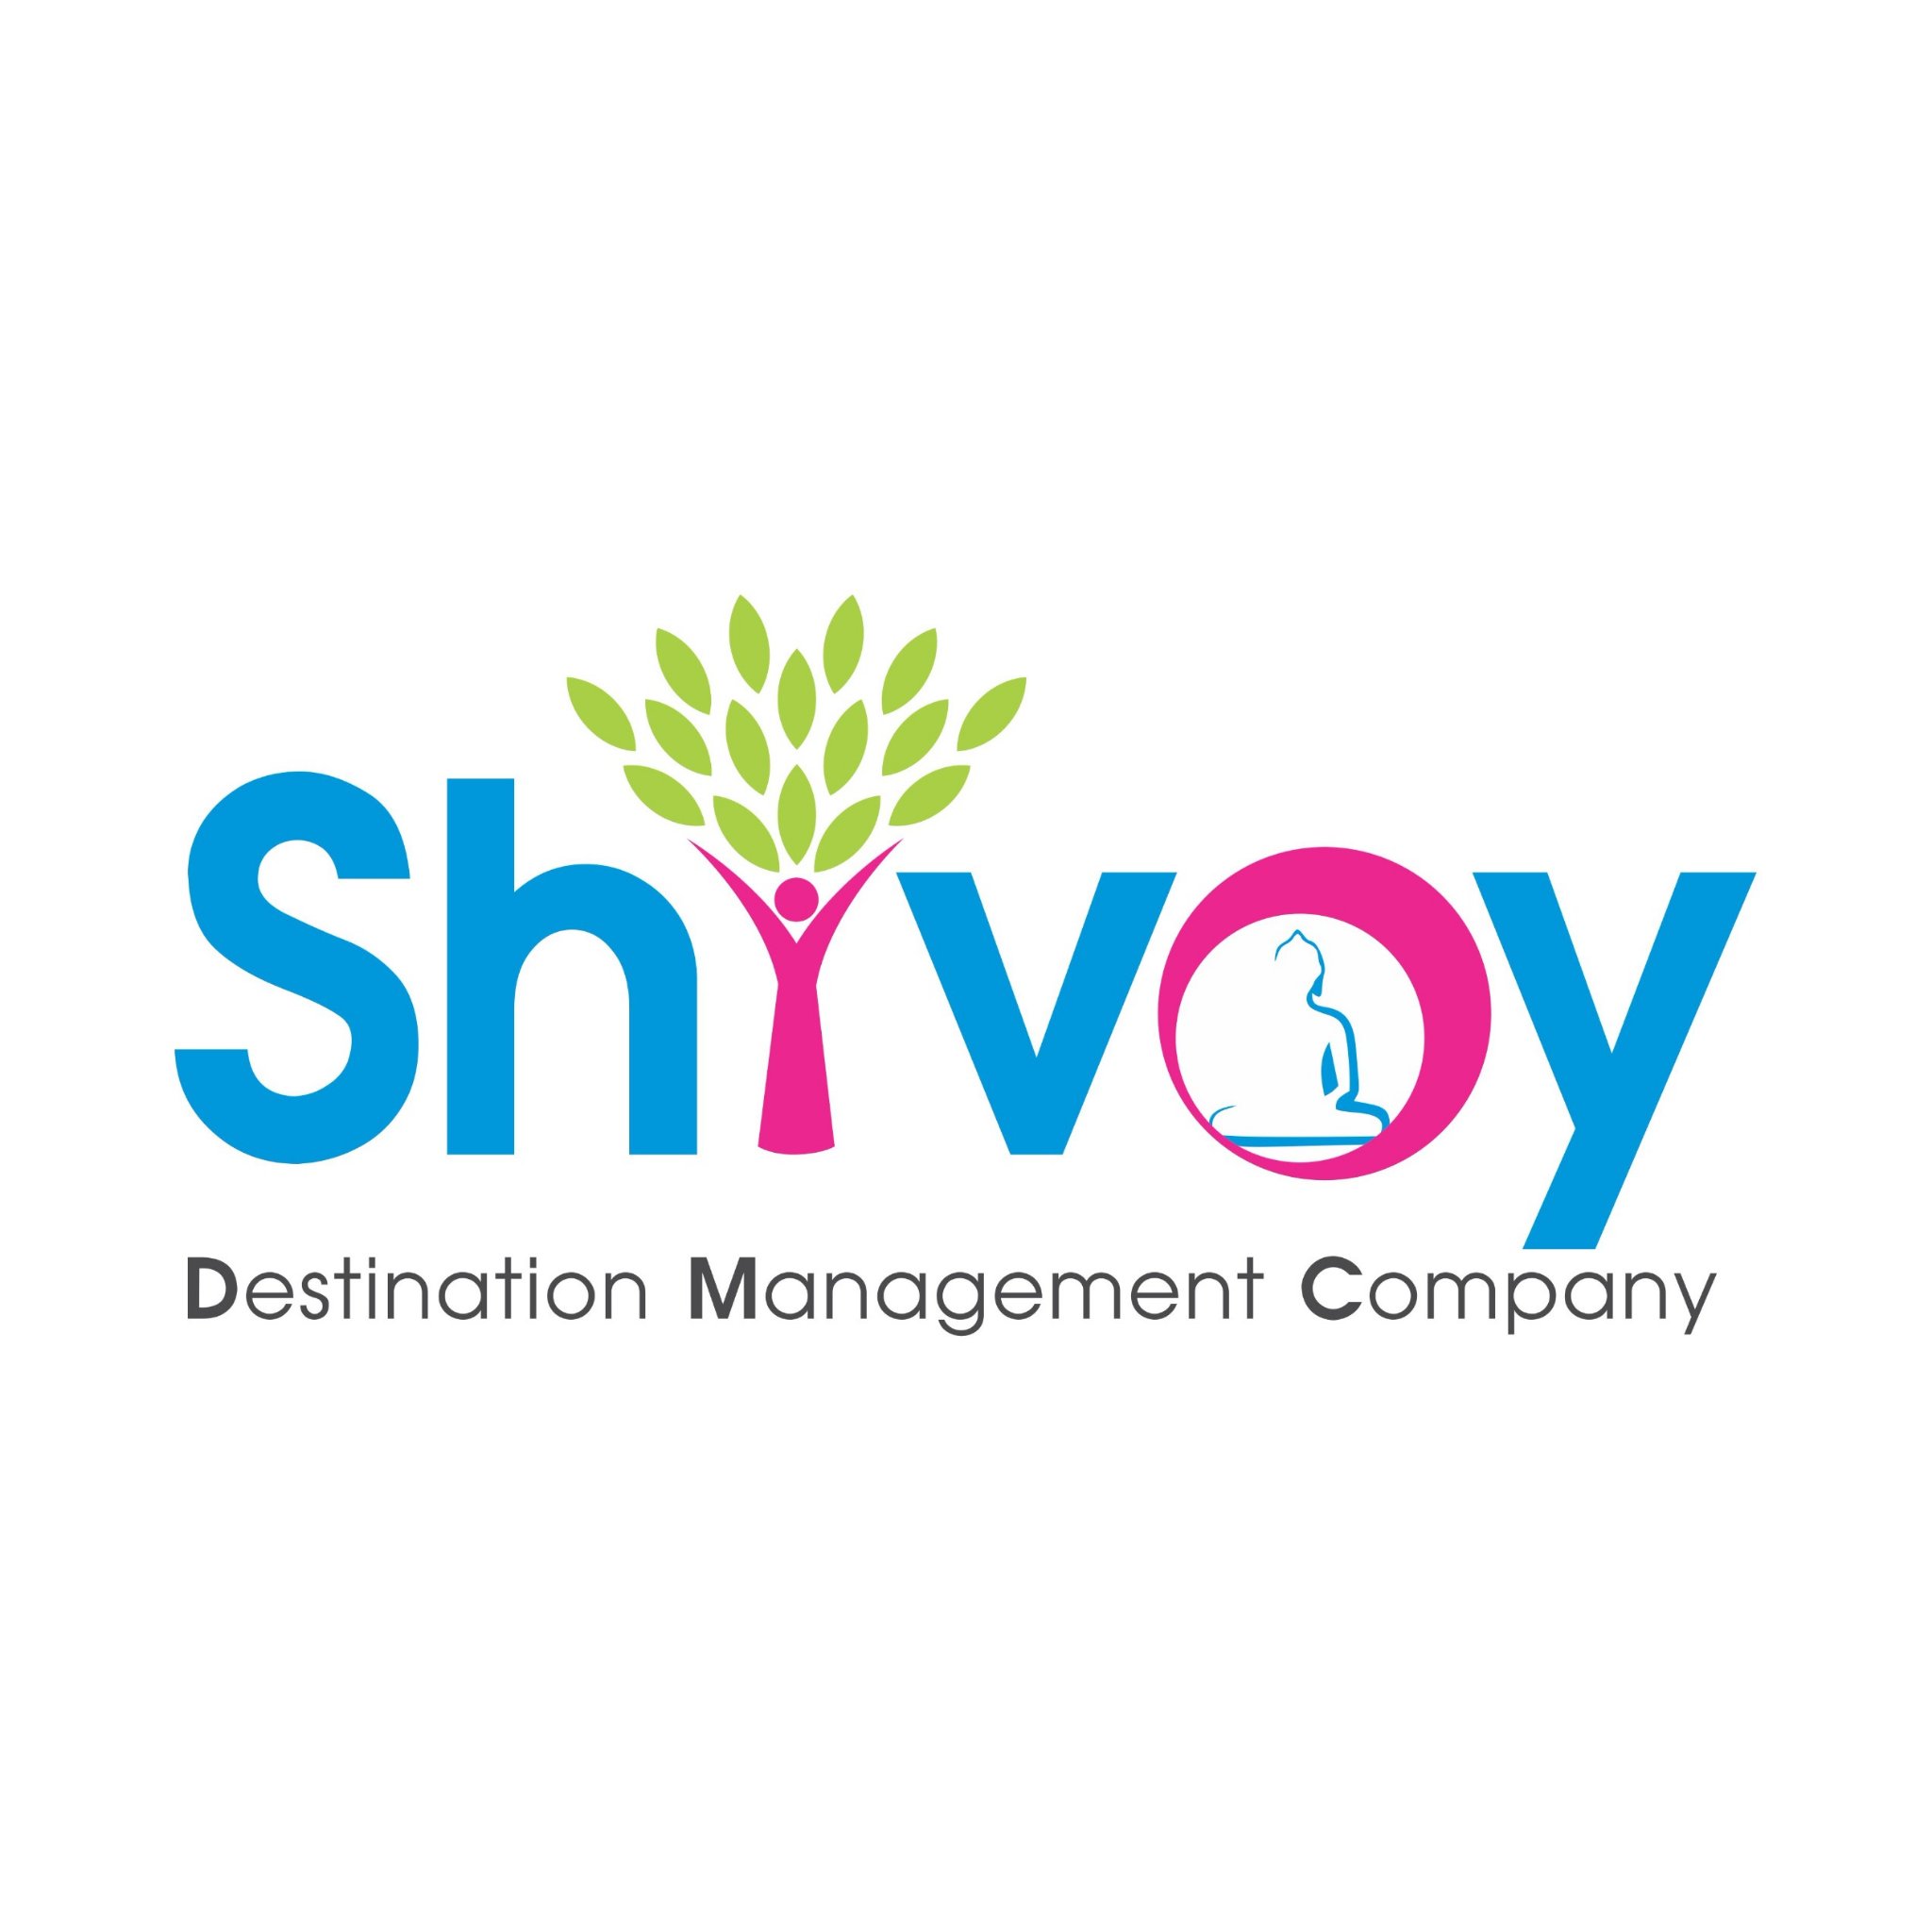 Hello everyone, we Shivoy DMC, a B2B Destination Management Company offering Family Holidays, Group Travel, Solo travelers, MICE and Educational Tours.